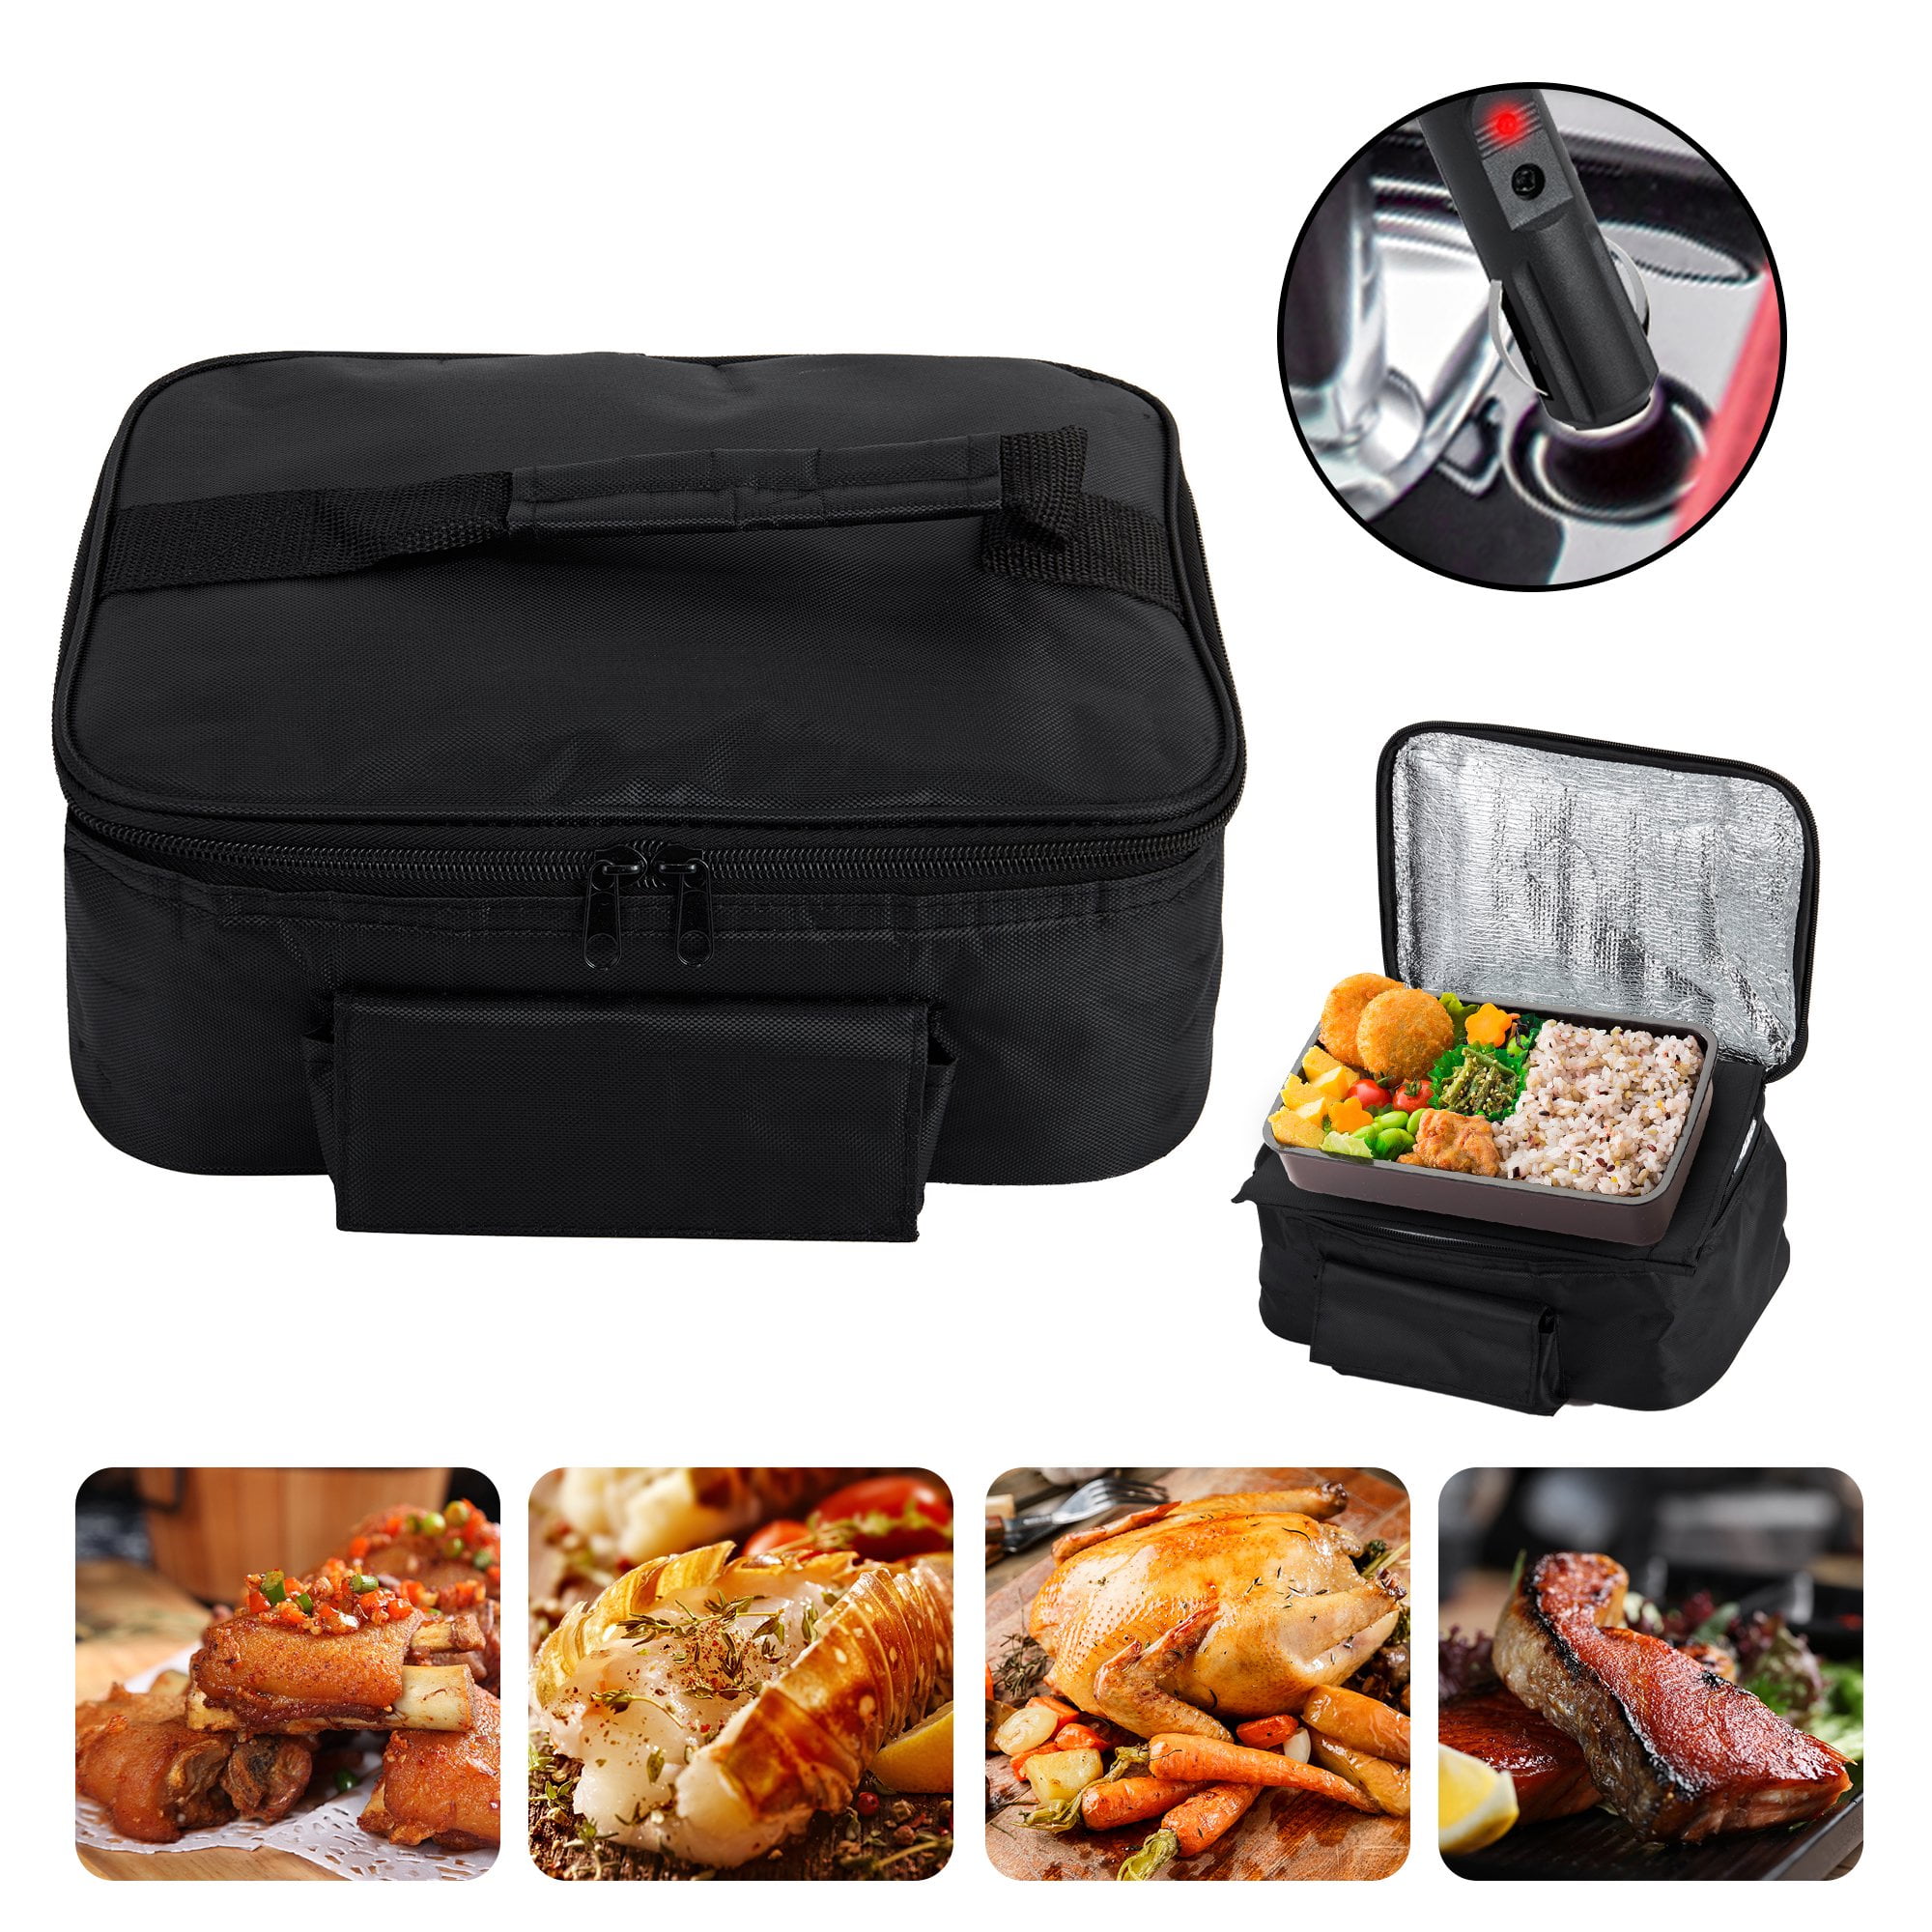 Portable Oven, 12V, 24V, 110V Car Food Warmer, Portable Mini Oven, Personal Microwave, Heated Lunch Box for Cooking and Reheating Food in  Car, Truck, Travel, Camping, Work, Home